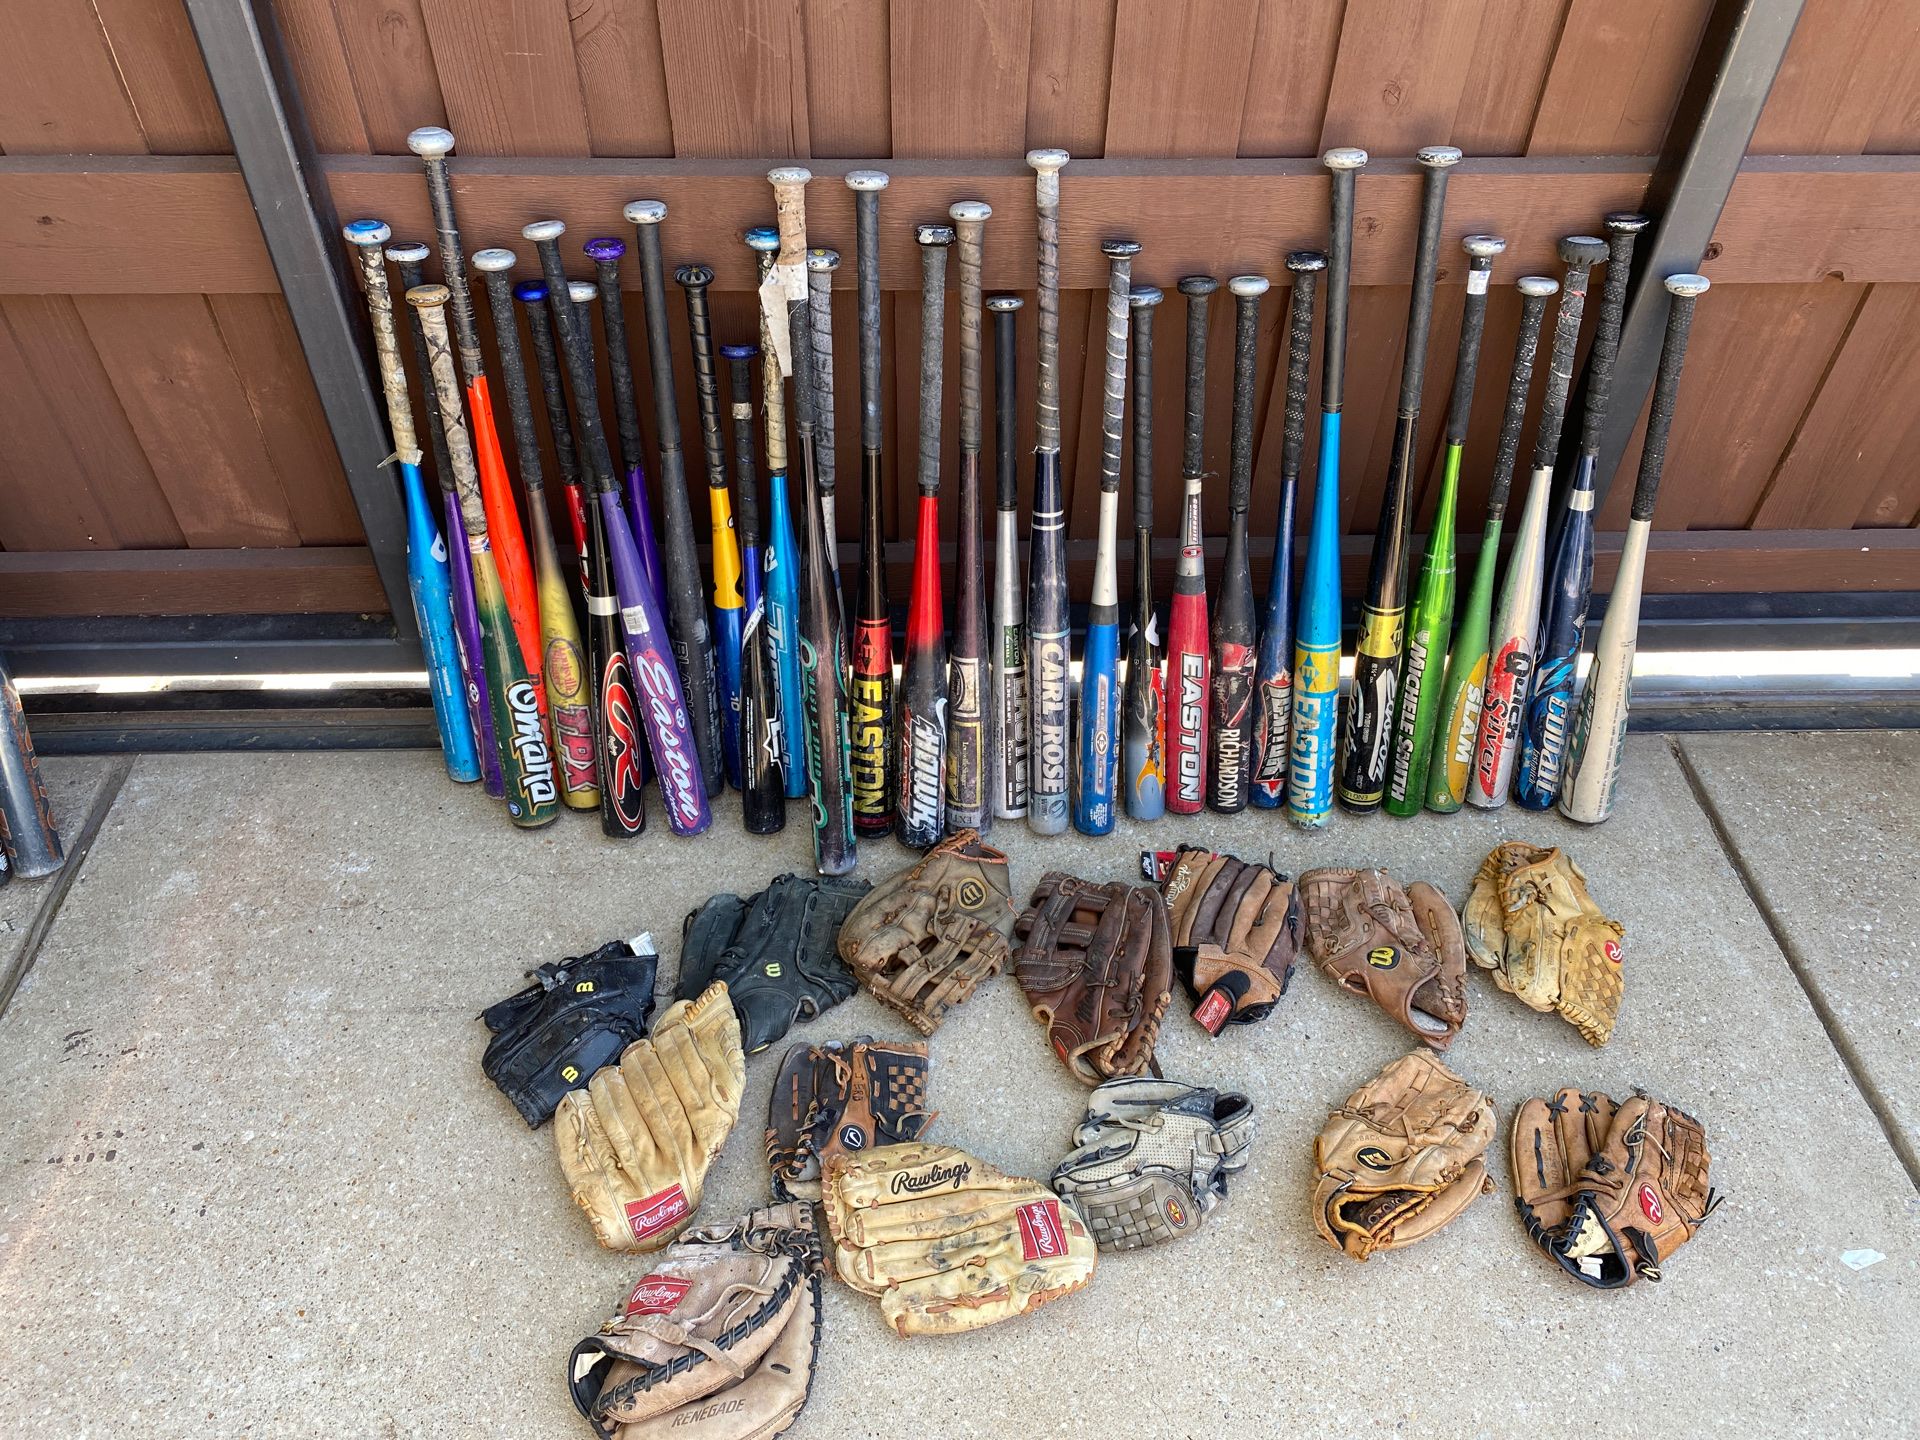 Baseball and softball lot. Bats and gloves. Will sell only together